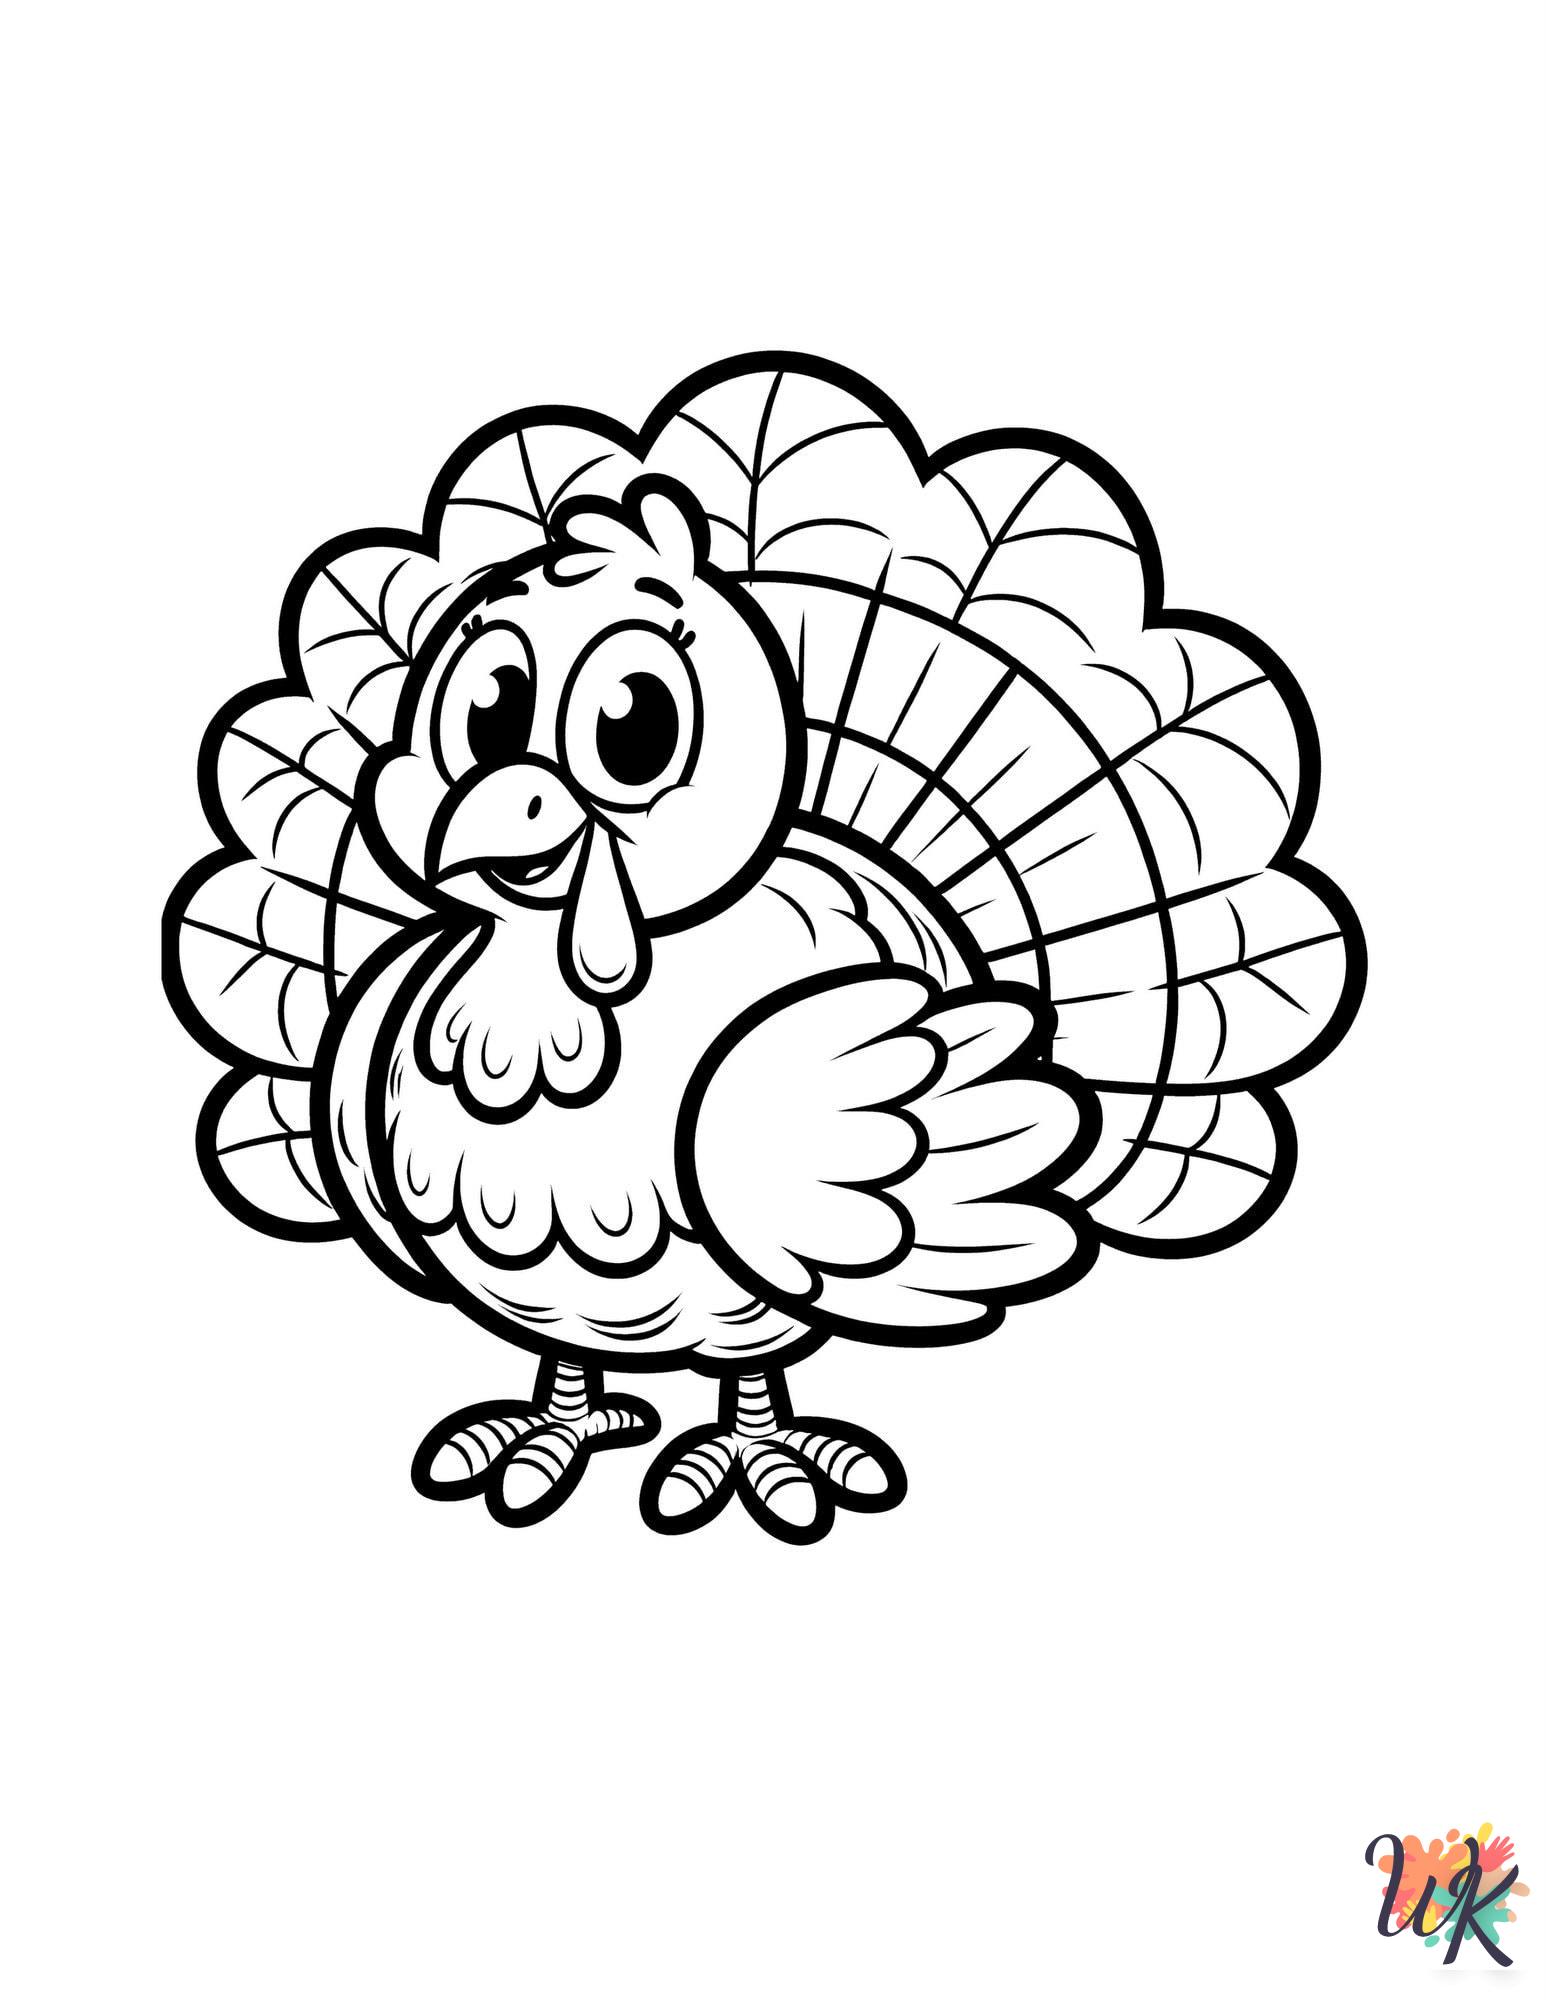 Turkey coloring pages for kids